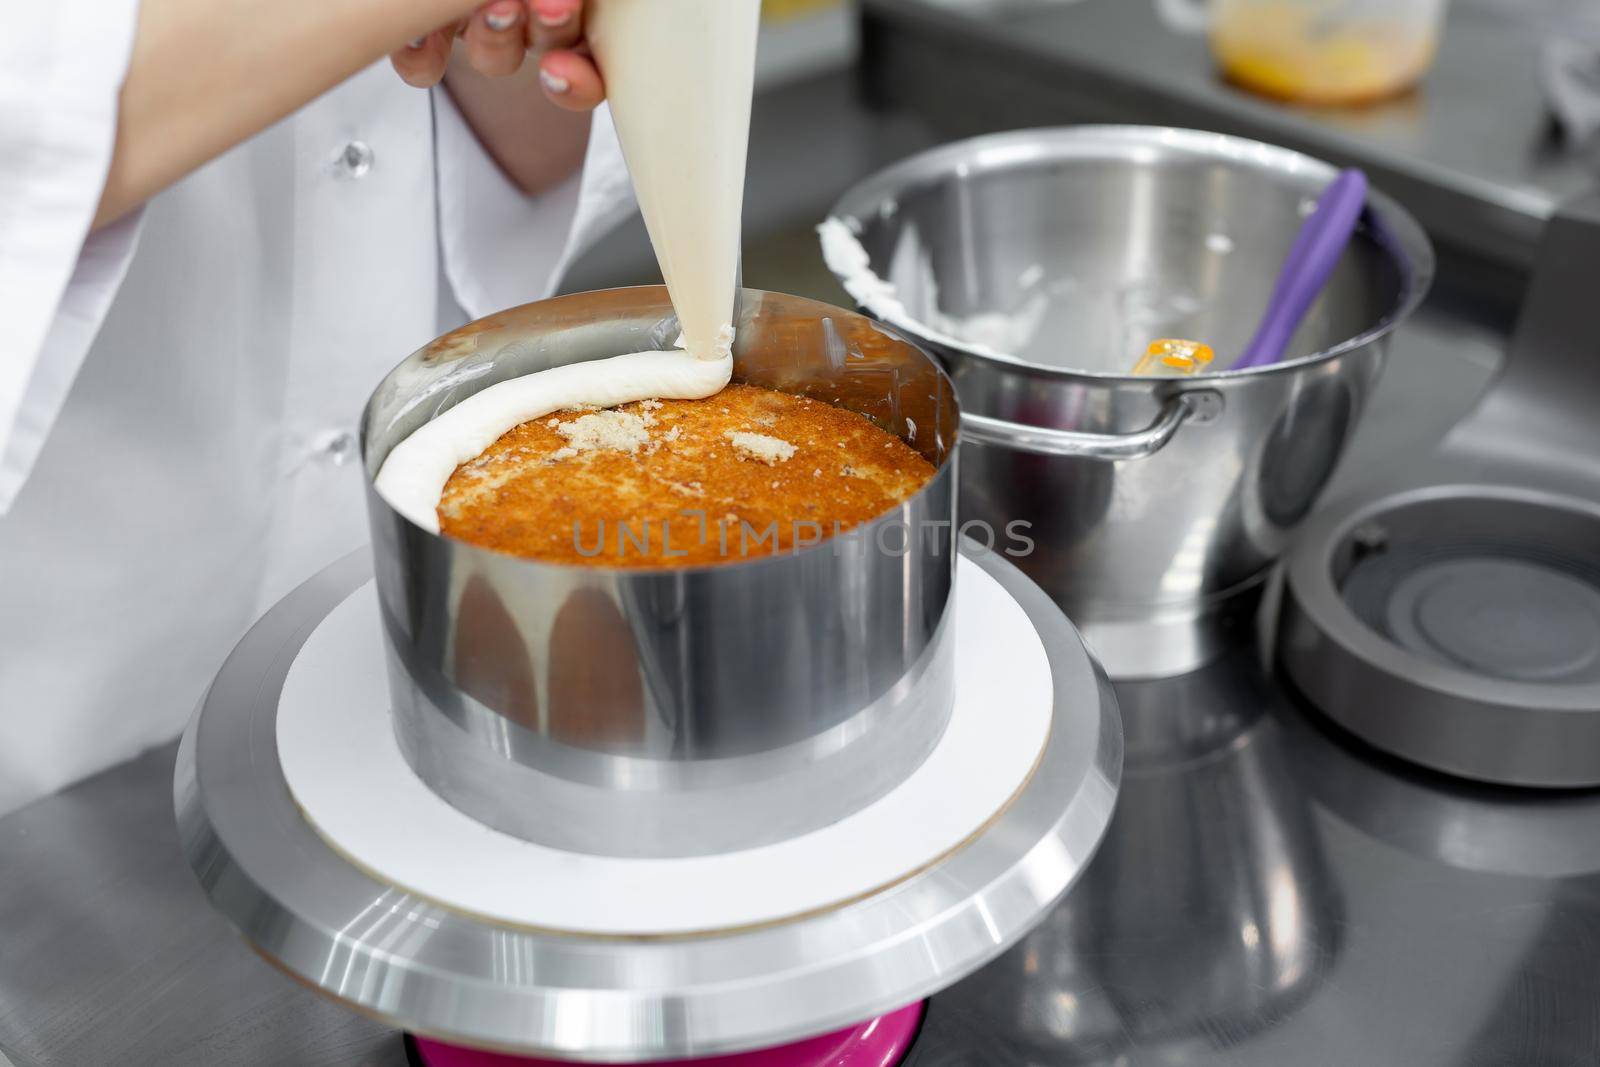 Confectioner apply cream from a pastry bag to the cake.